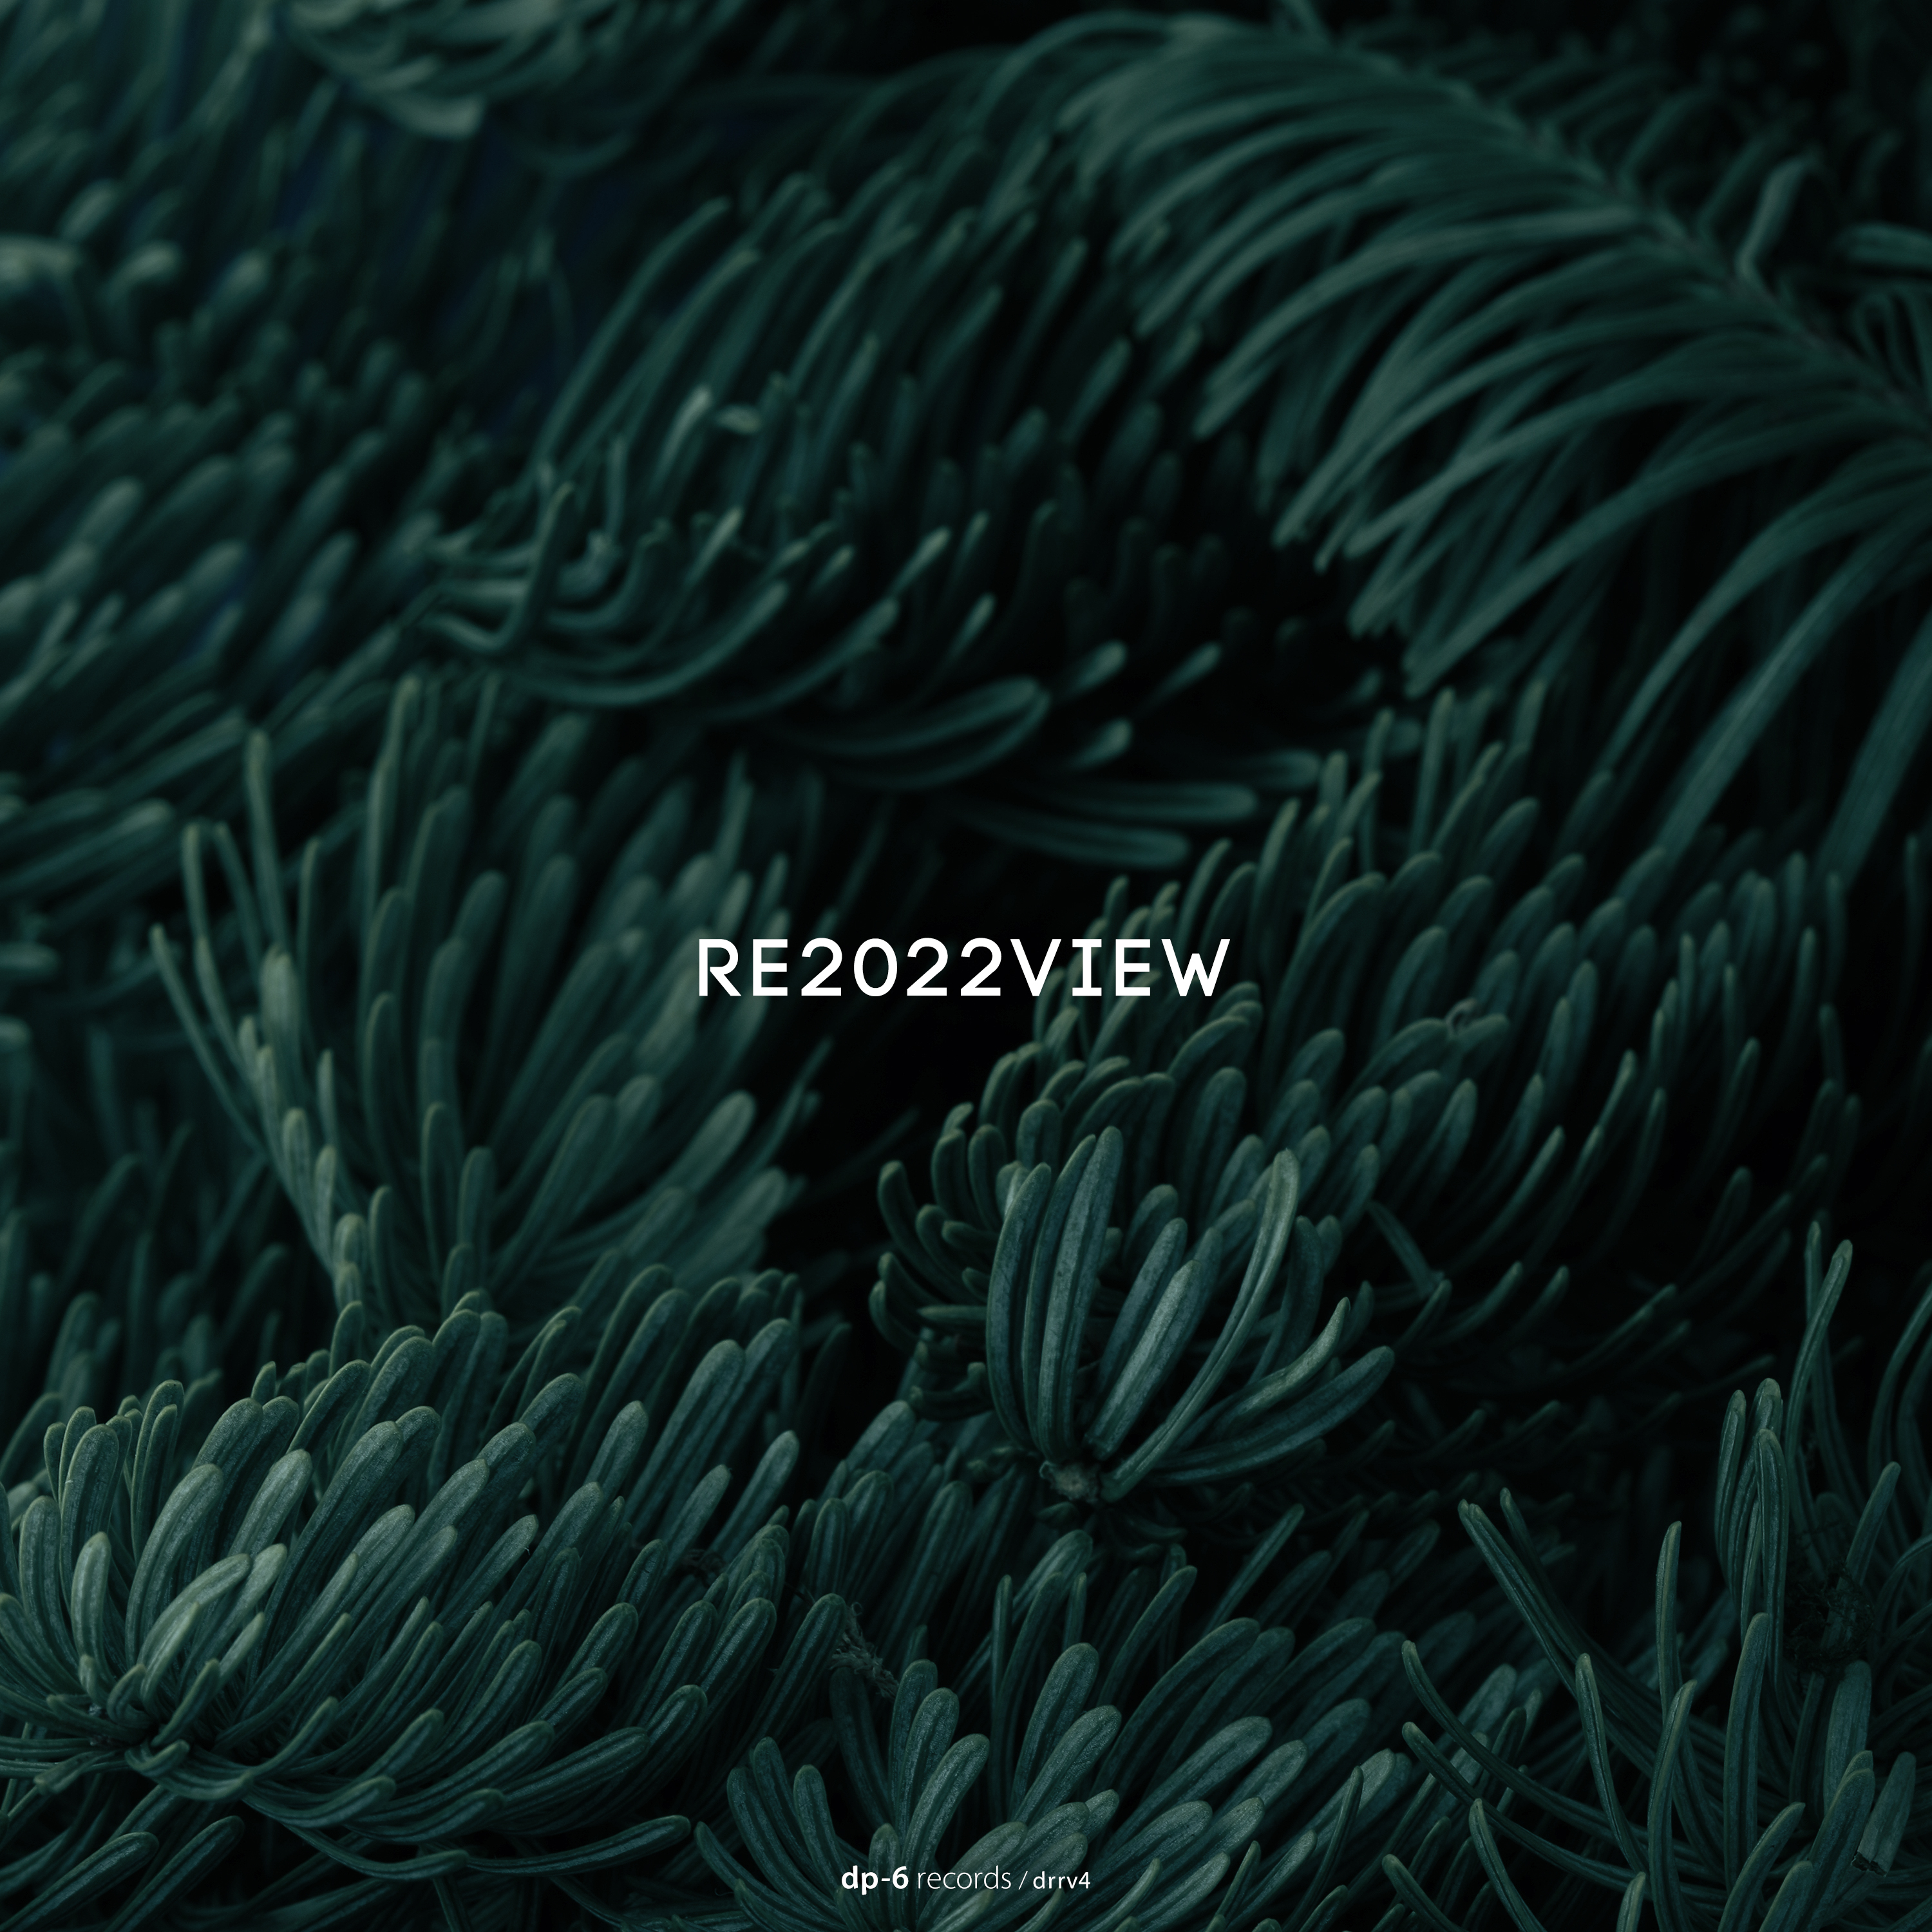 RE2022VIEW